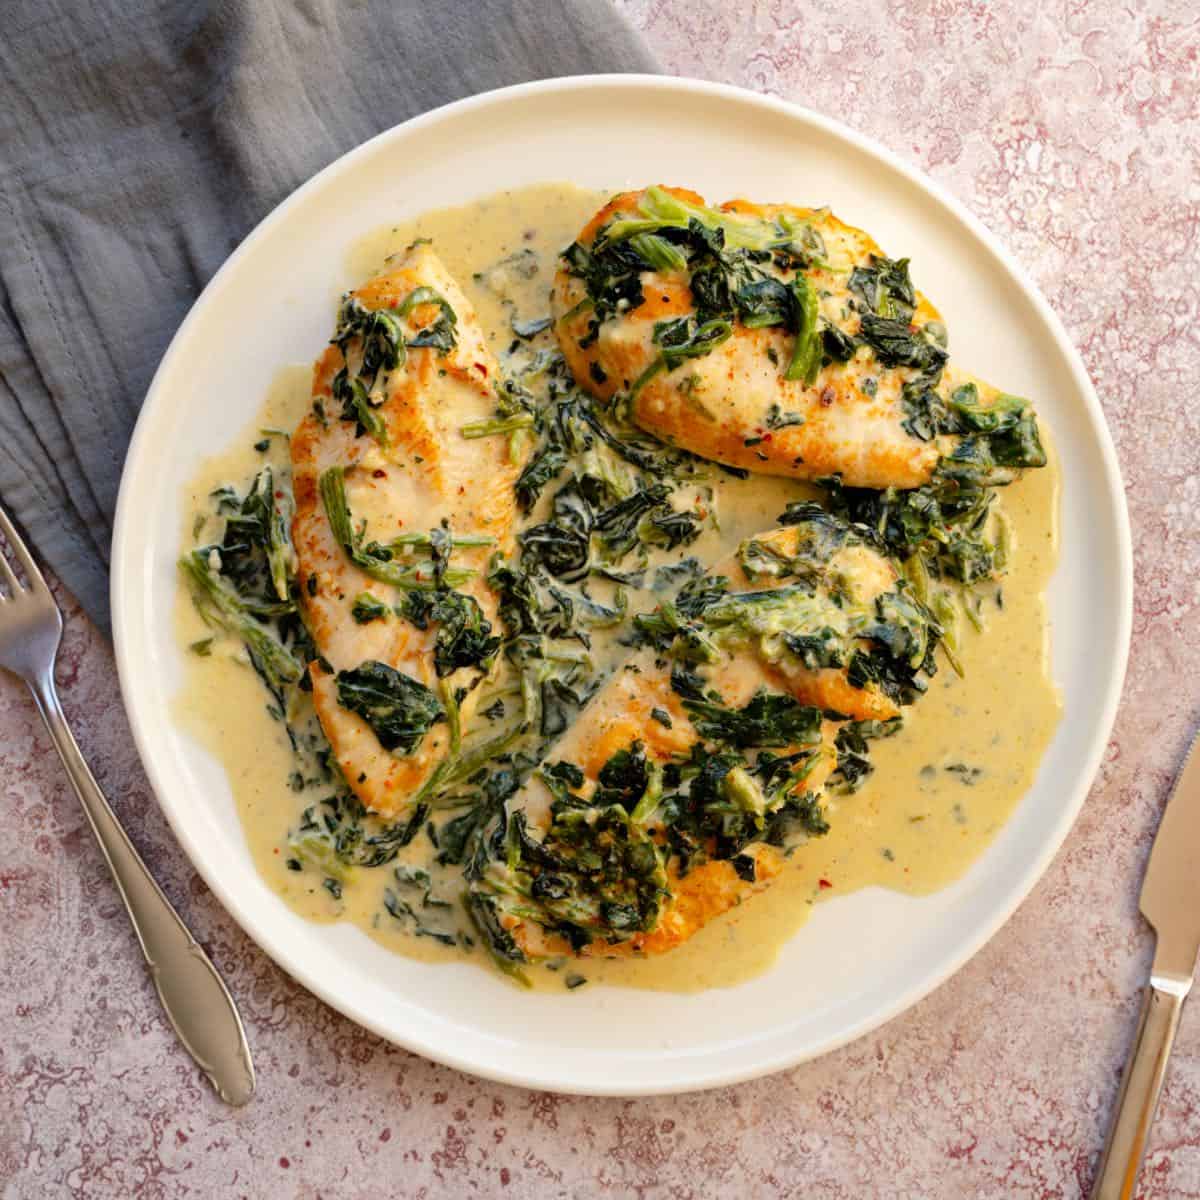 A plate featuring creamy Chicken Florentine beside a knife and fork.